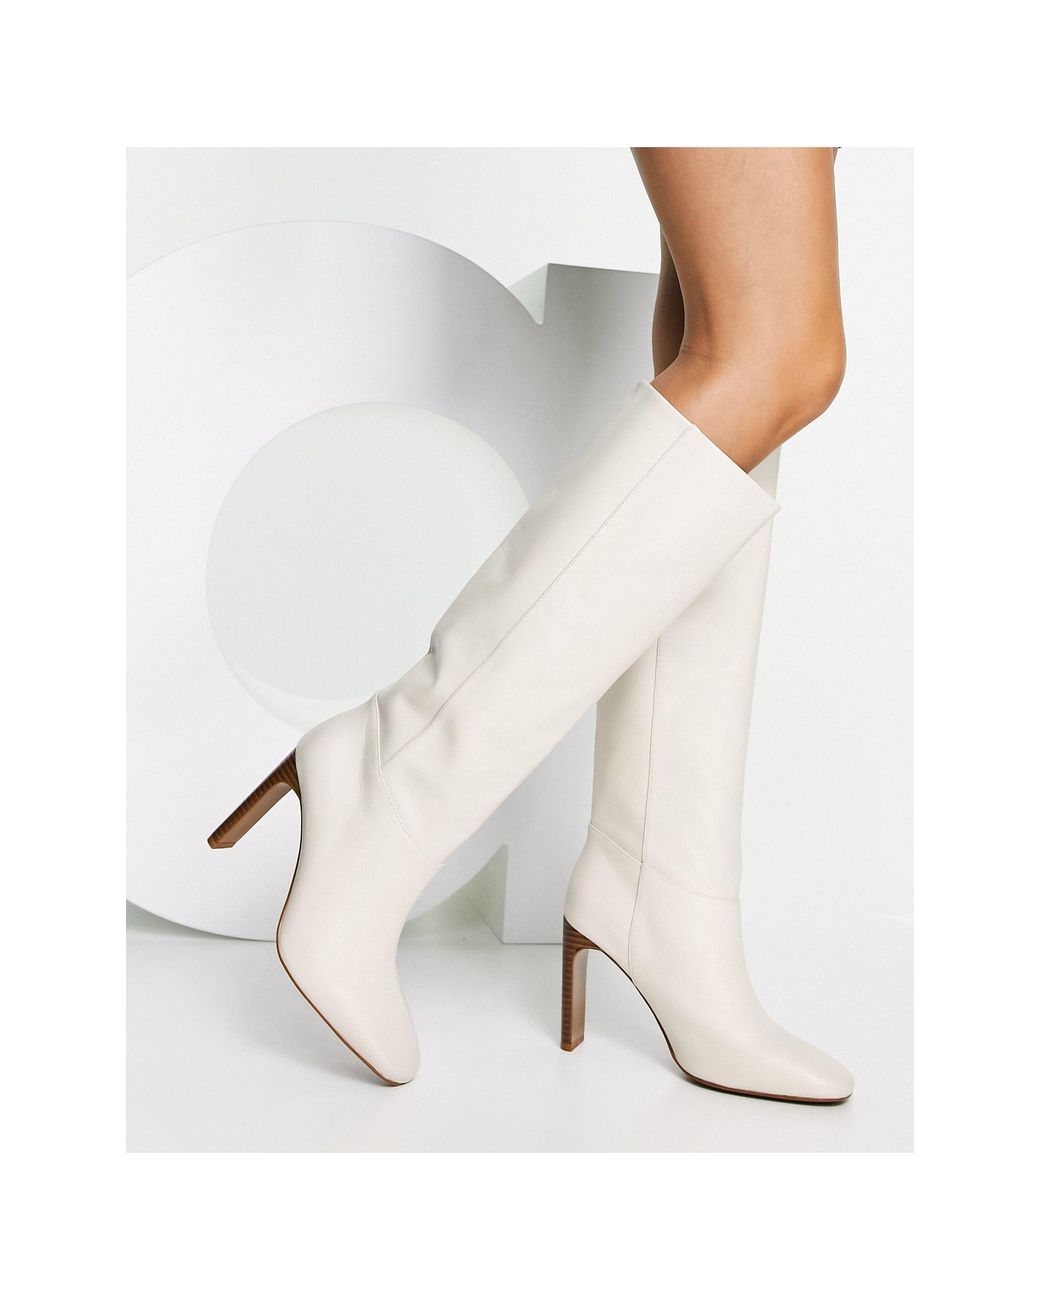 Mango Leather Knee High Heeled Boots in White | Lyst